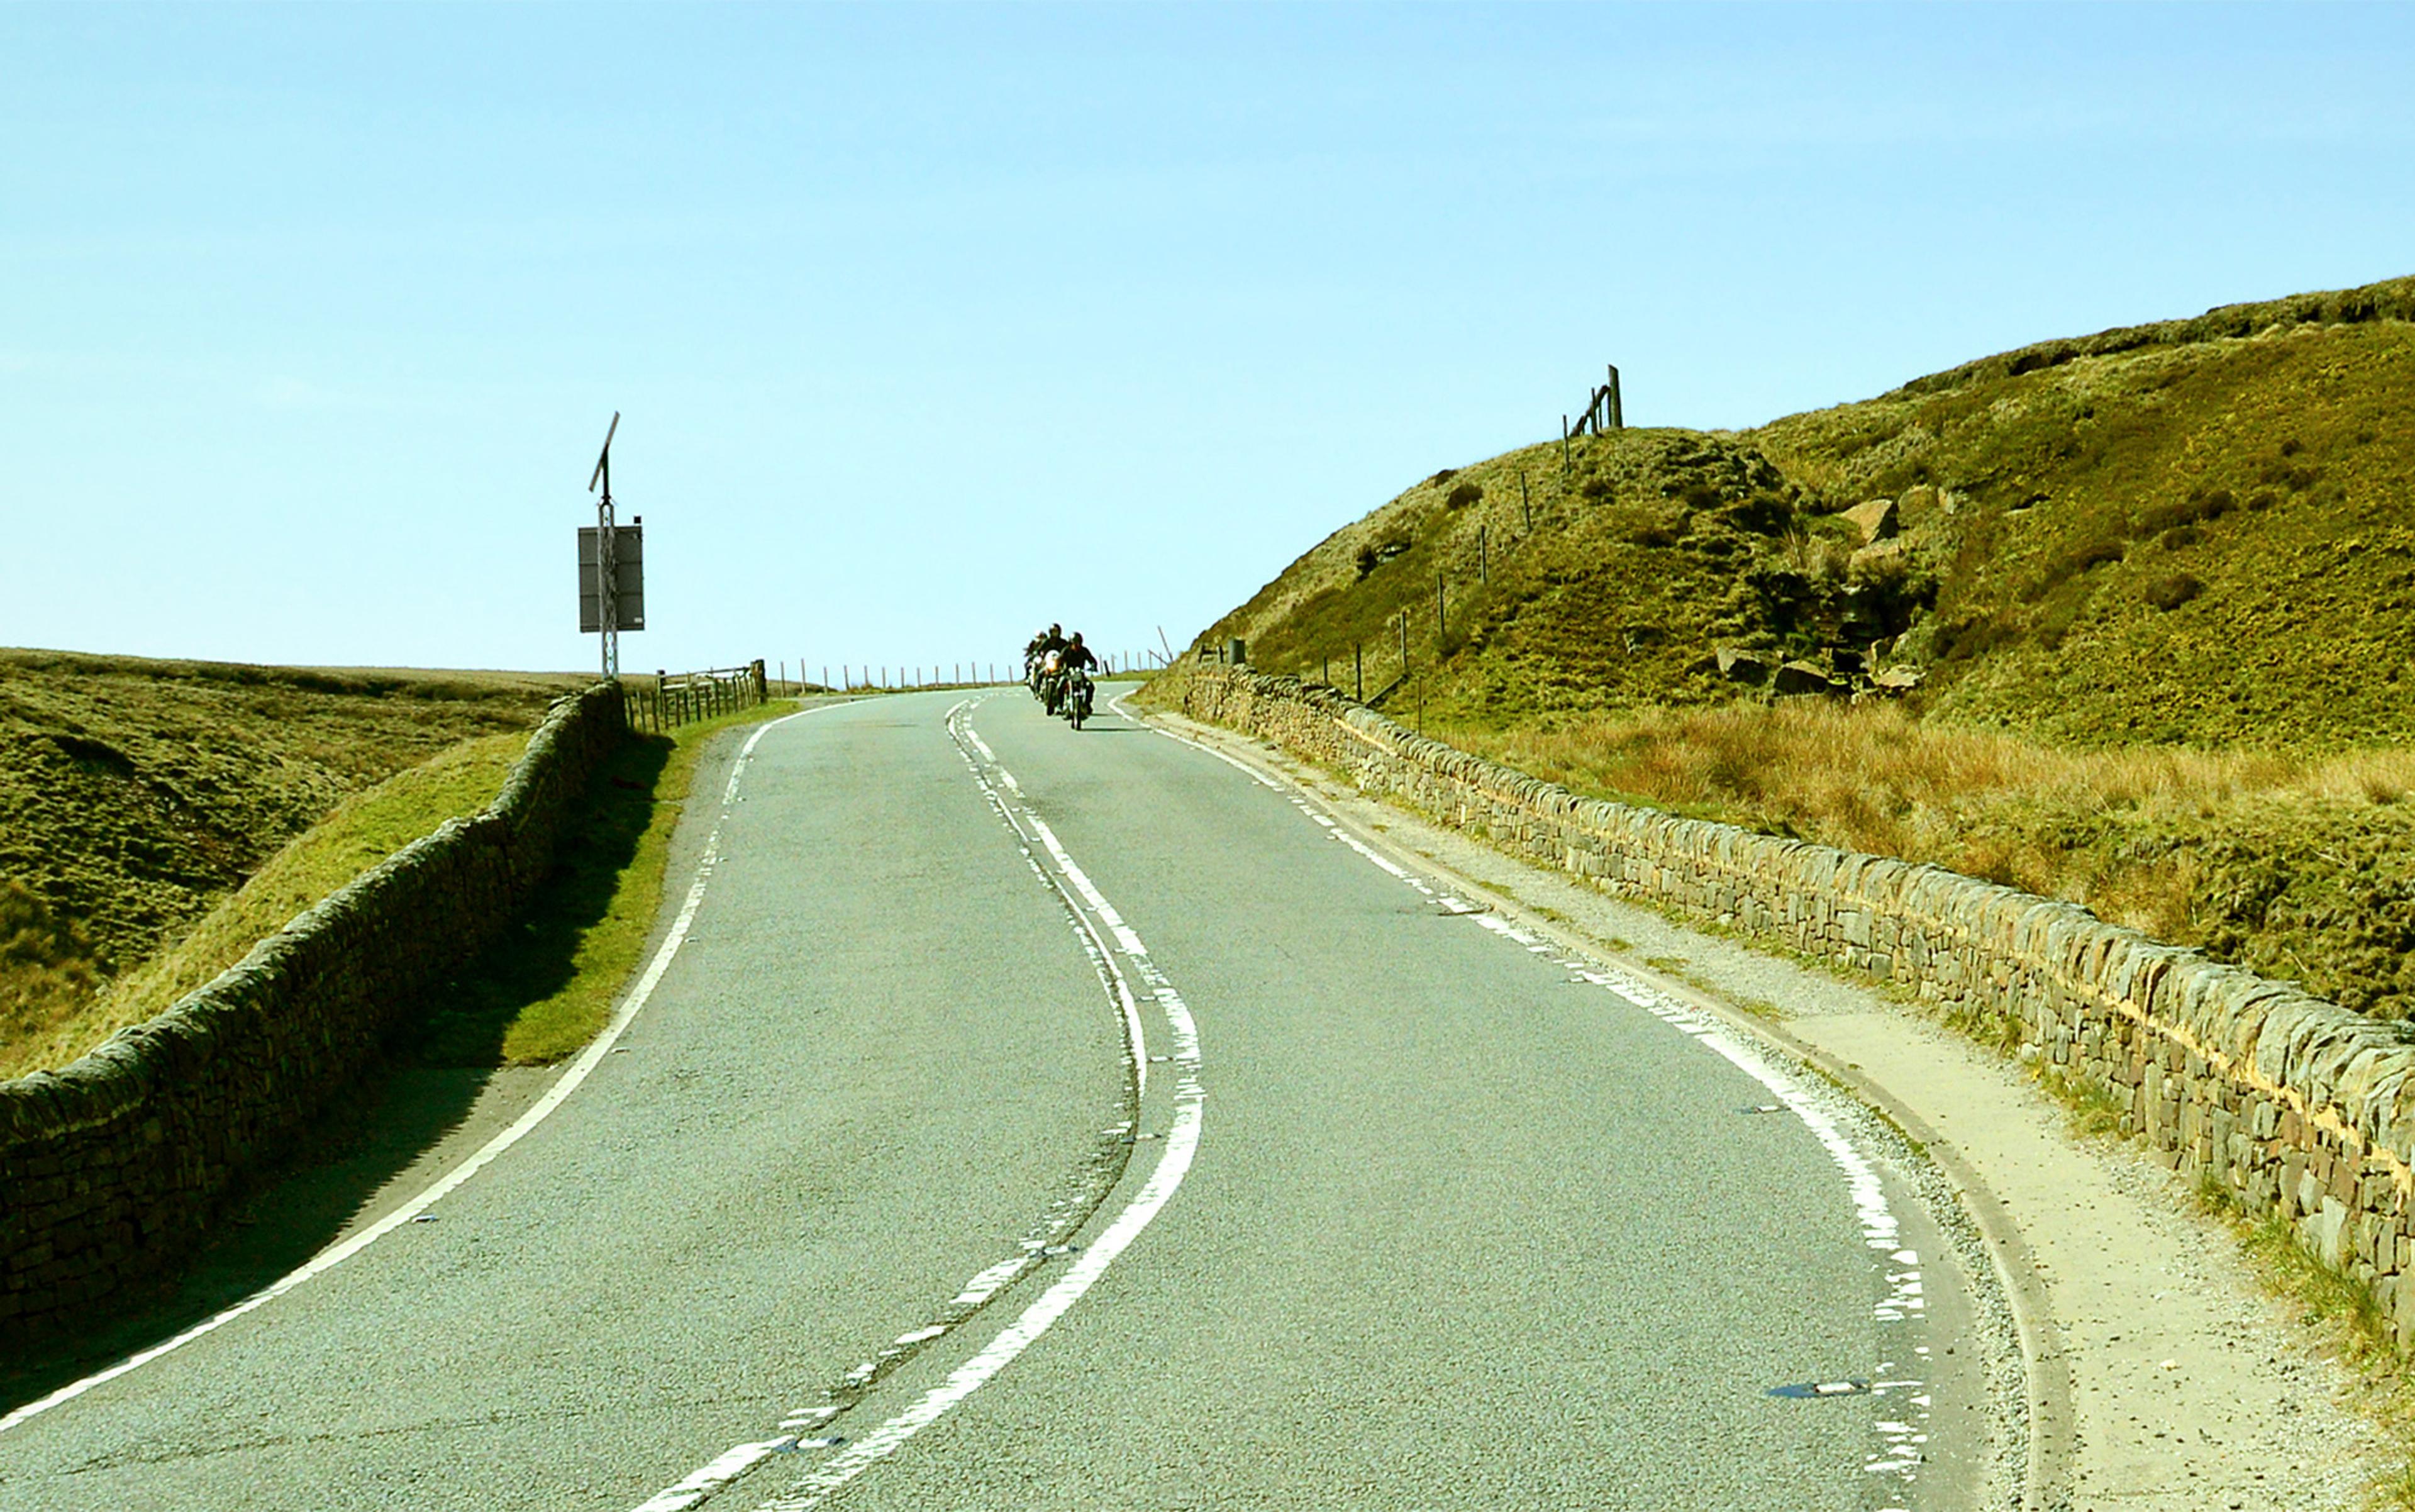 Three motorcyclists are riding on an empty road winding through English moorland beneath a blue sky